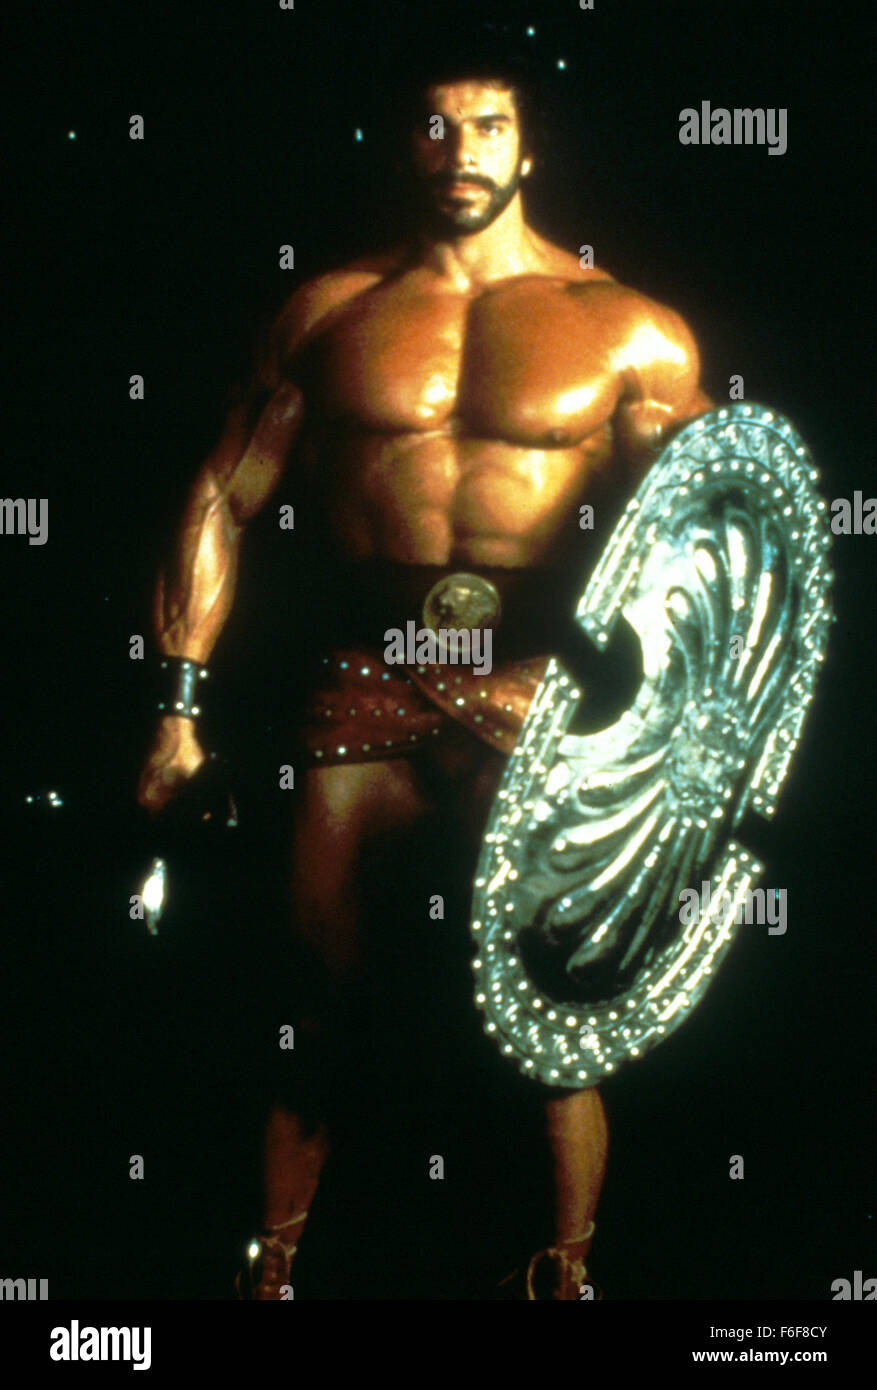 RELEASE DATE: August 12, 1983   MOVIE TITLE: Hercules   DIRECTOR: Luigi Cozzi  STUDIO: MGM   PLOT: The movie tells the story of the Greek mythological figure Hercules, updated in this 80's version   PICTURED: LOU FERRIGNO as Hercules   (Credit Image: c MGM/Entertainment Pictures) Stock Photo